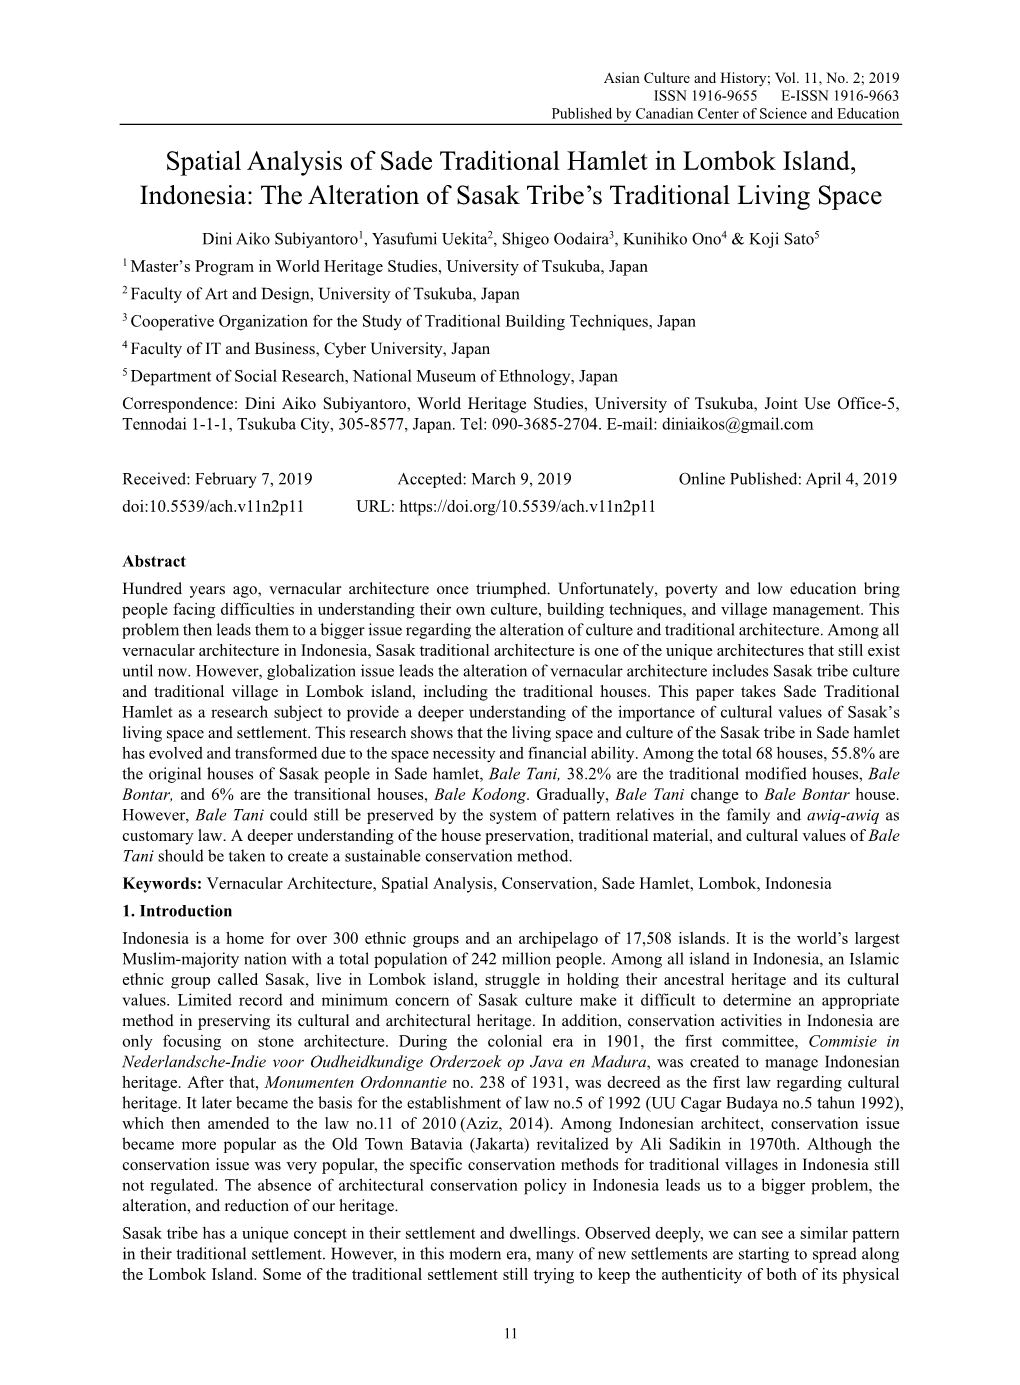 Spatial Analysis of Sade Traditional Hamlet in Lombok Island, Indonesia: the Alteration of Sasak Tribe’S Traditional Living Space